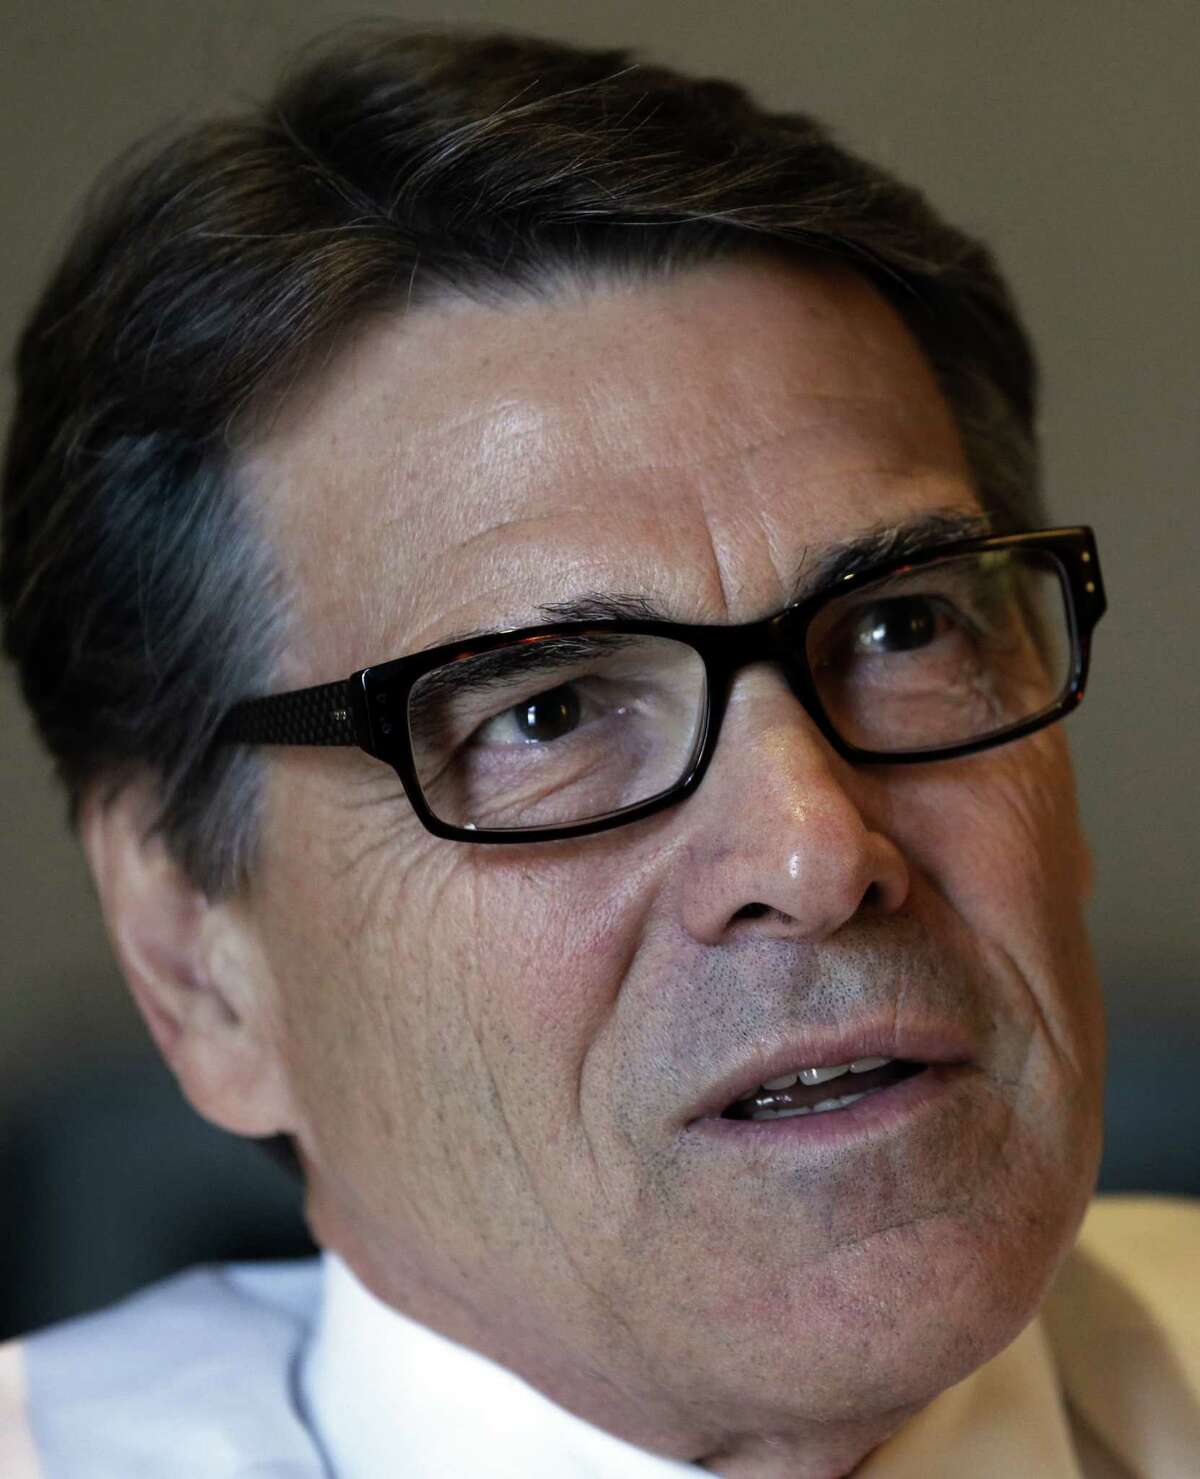 Rick Perry says the EPA “behaves more like activists than even-hand-ed regulators.”